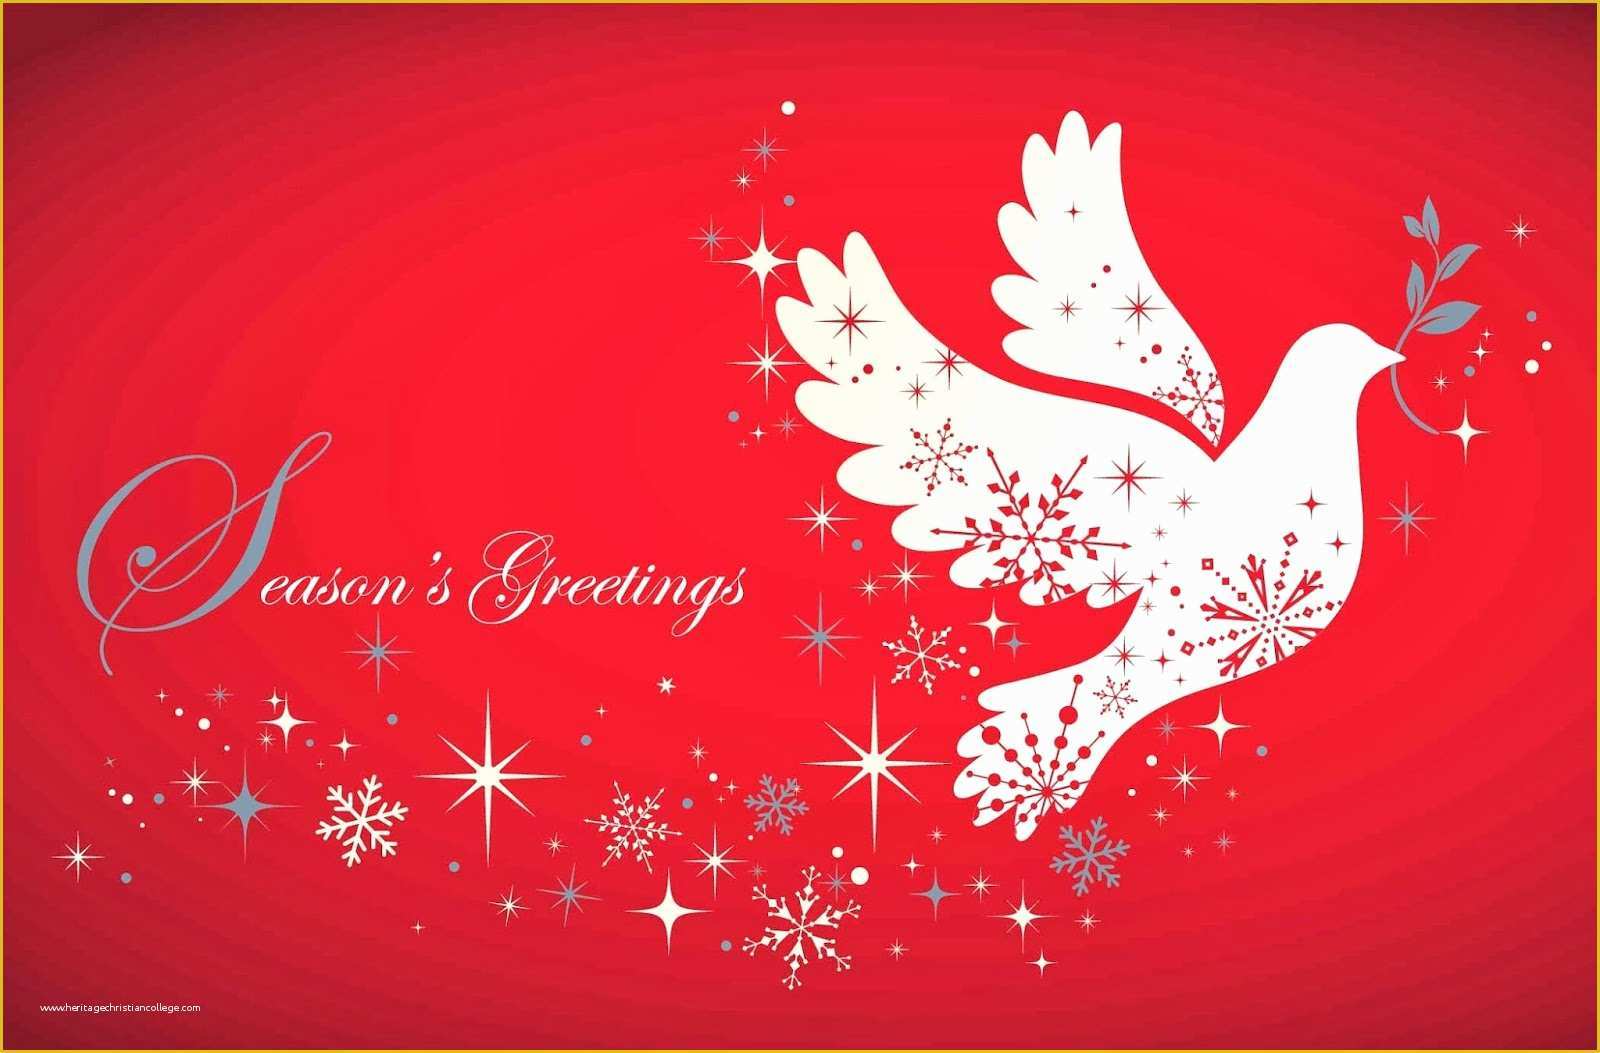 Free Religious Christmas Card Templates Of Christmas Cards High Quality Hd Greetings Free